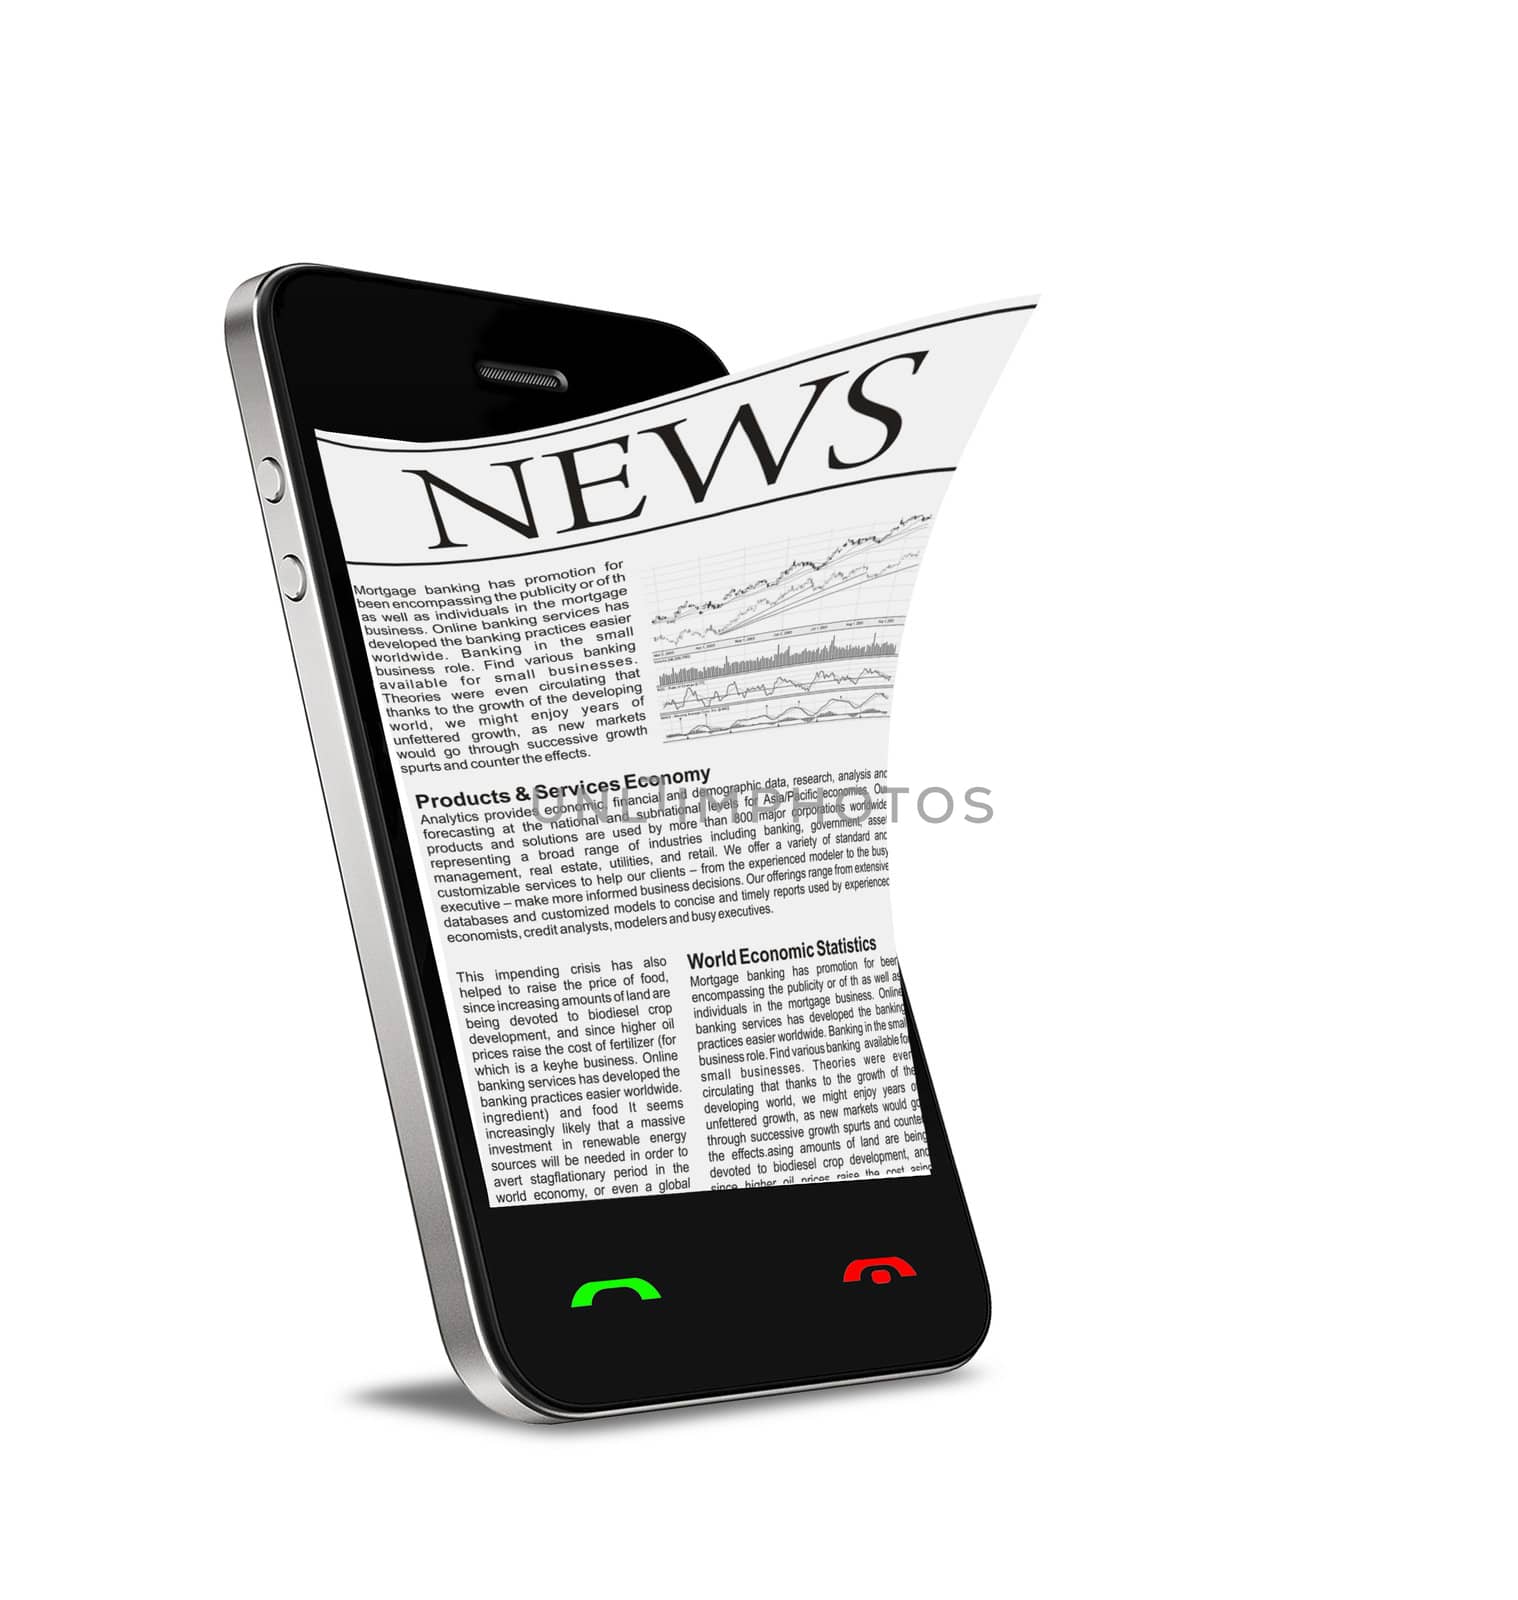 News on mobile phone, smart phone. Isolated on white.